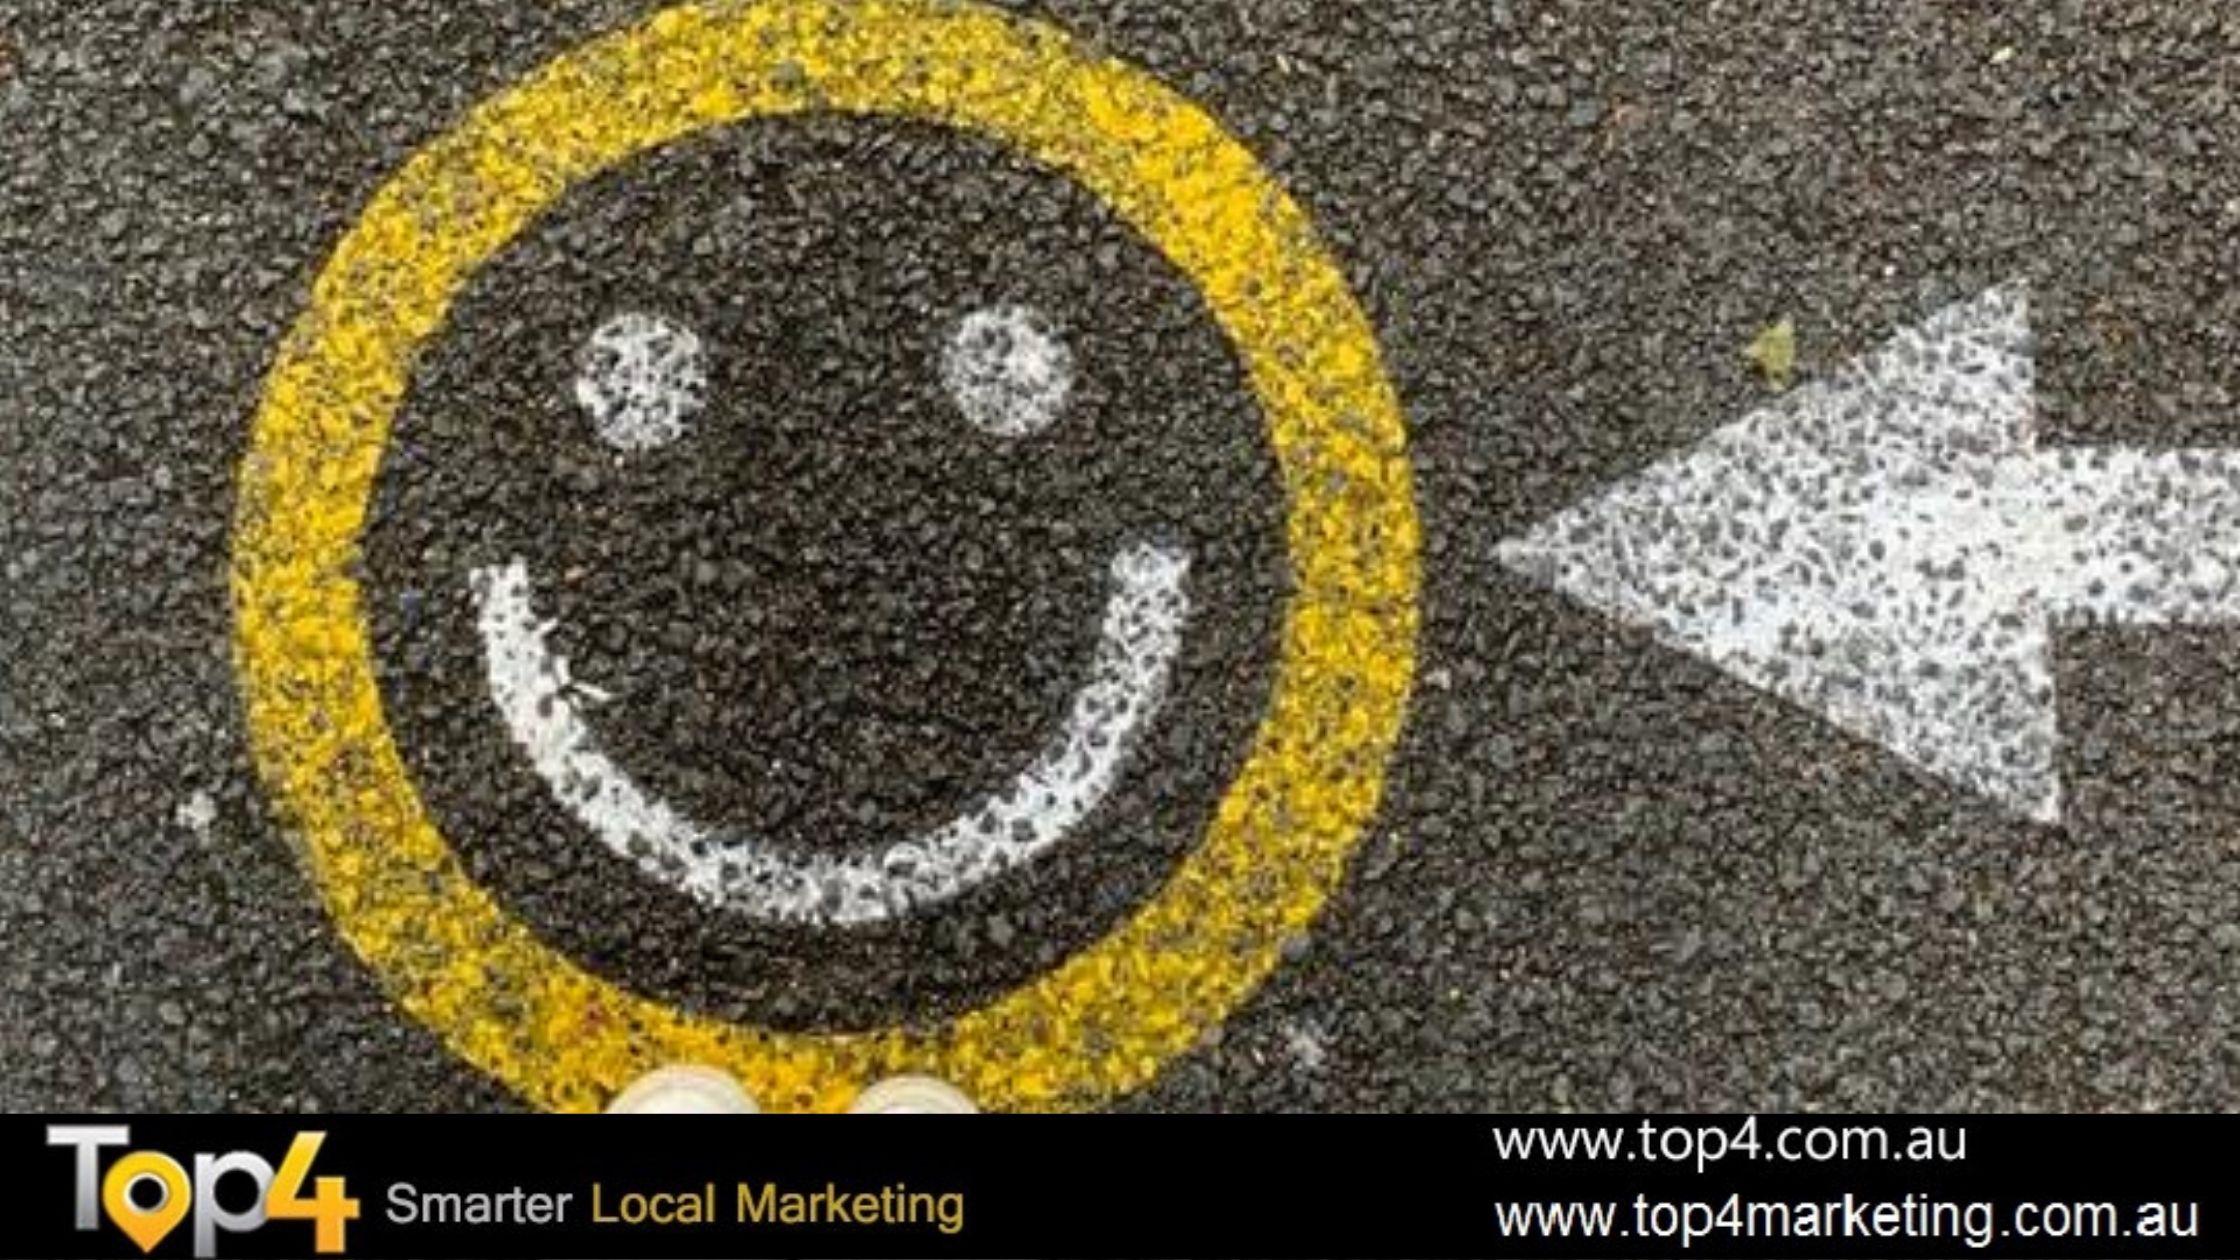 Reasons to be cheerful - Top4 Marketing